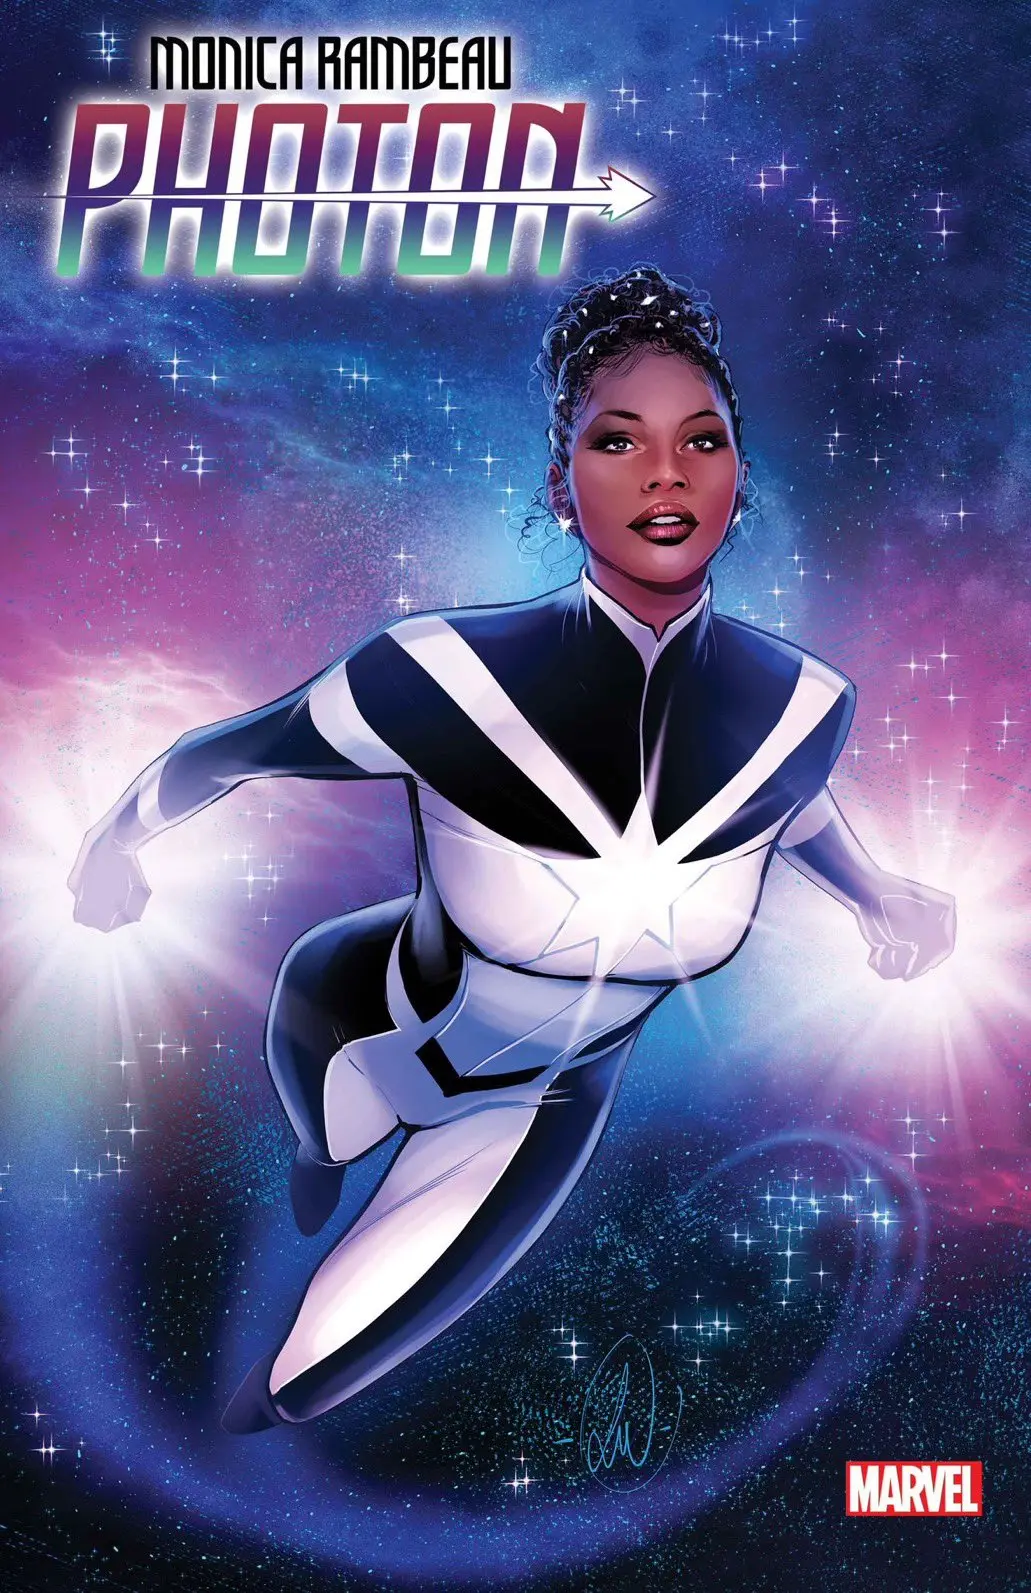 Monica Rambeau should be calling Photon in Captain Marvel 2.